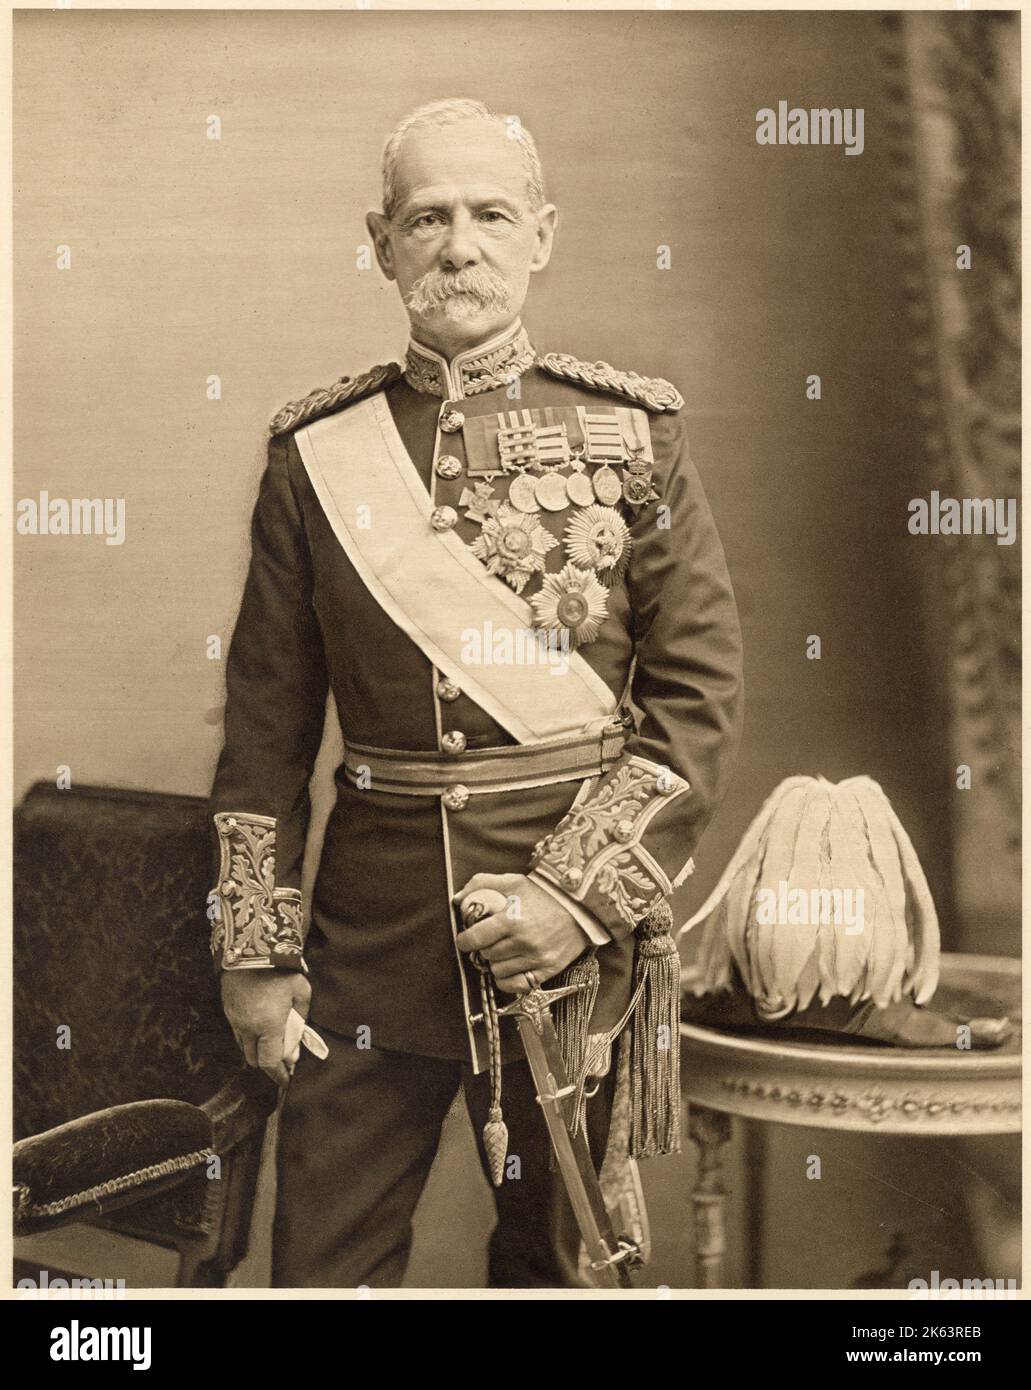 Frederick Sleigh Roberts, 1st Earl Roberts (1832 - 1914), British soldier who was one of the most successful commanders of the 19th century. He served in the Indian rebellion, the Expedition to Abyssinia and the Second Anglo-Afghan War before leading British Forces to success in the Second Boer War. Stock Photo